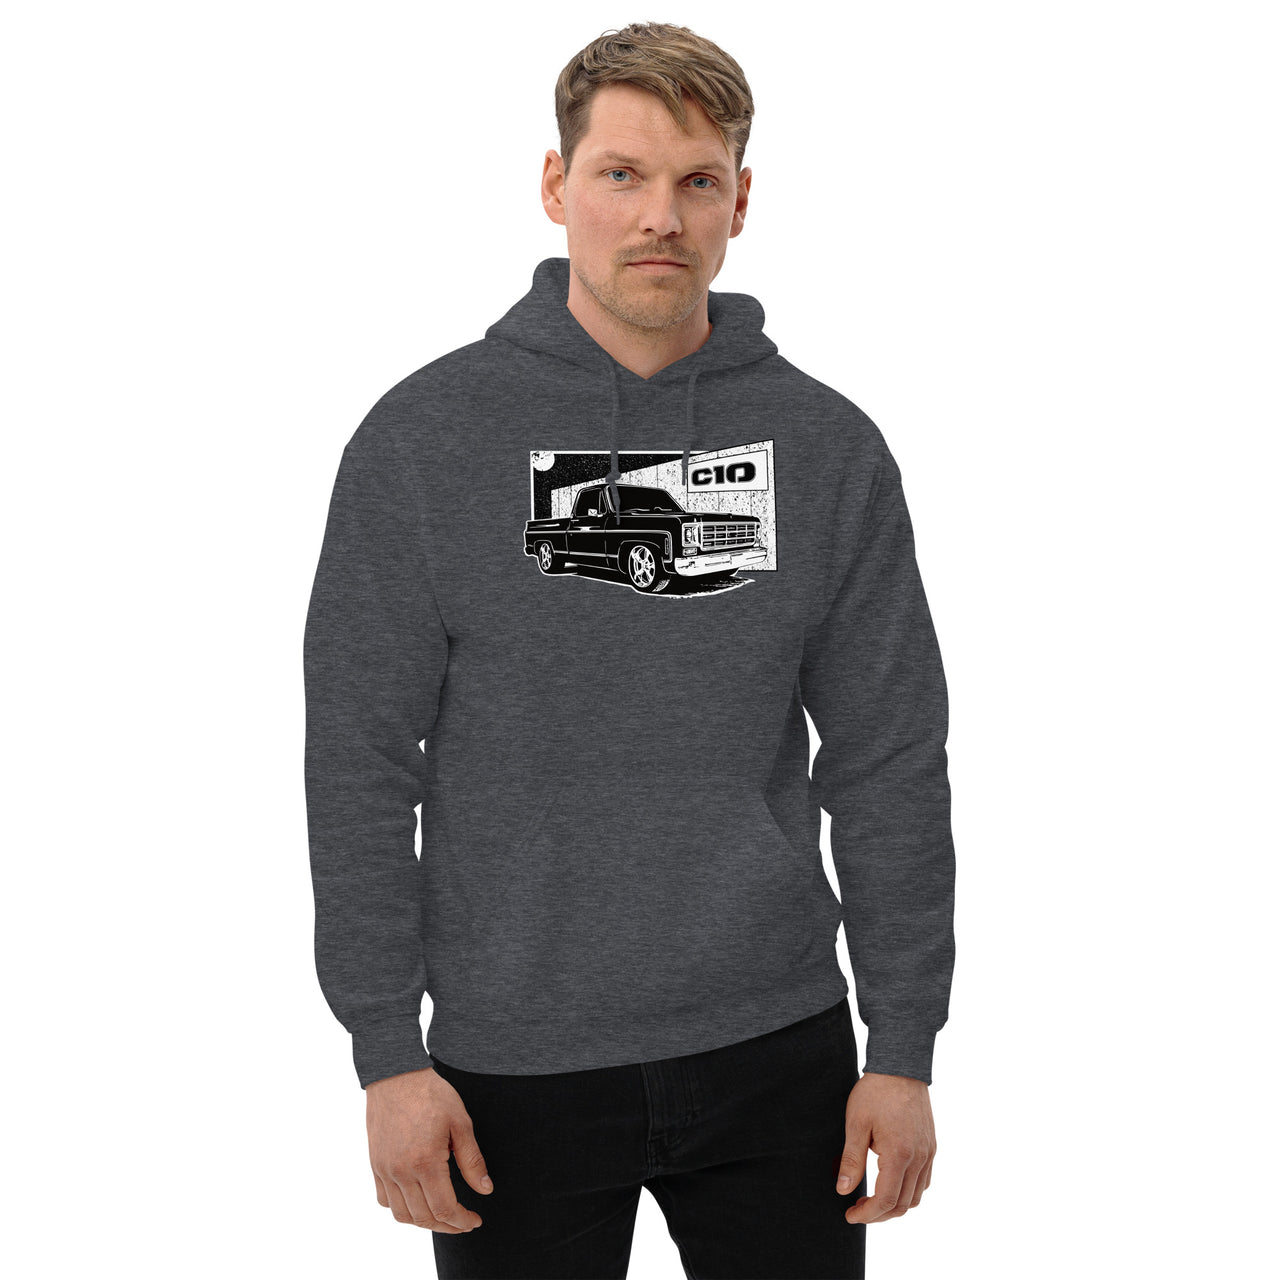 Square Body C10 Hoodie modeled in grey